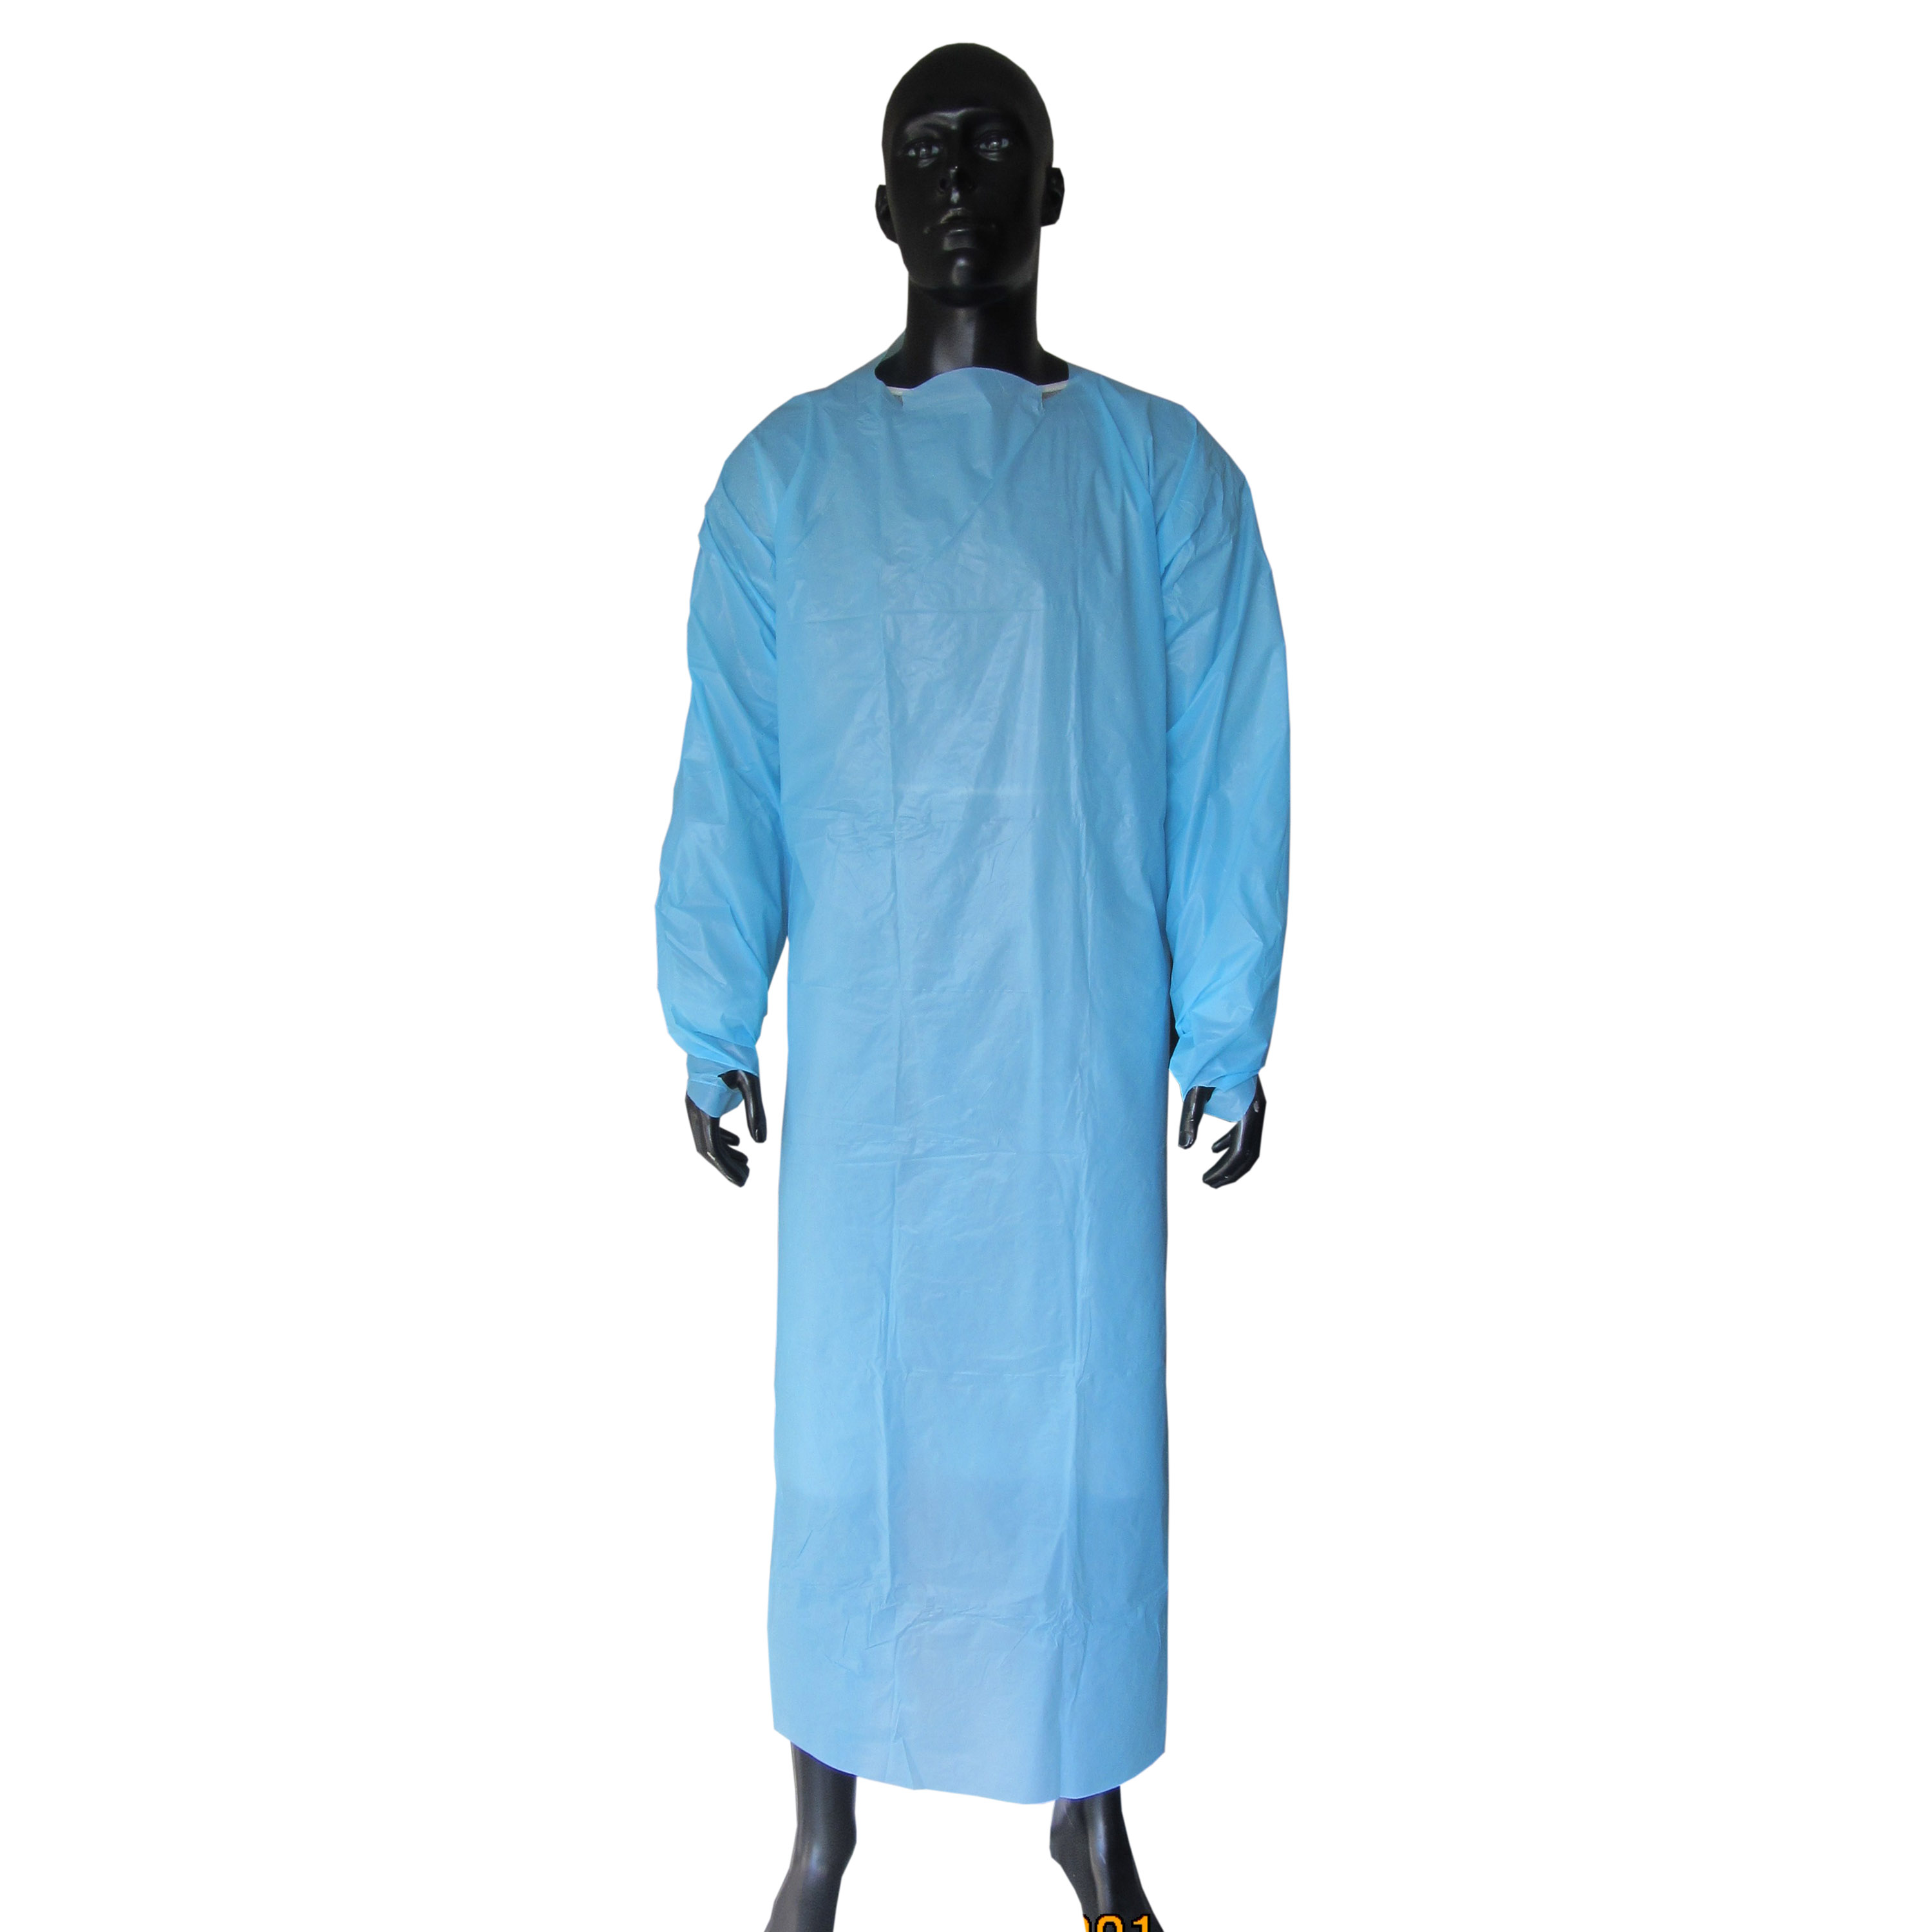 Factory supplier competitive price disposable CPE isolation gown with thumb hole 